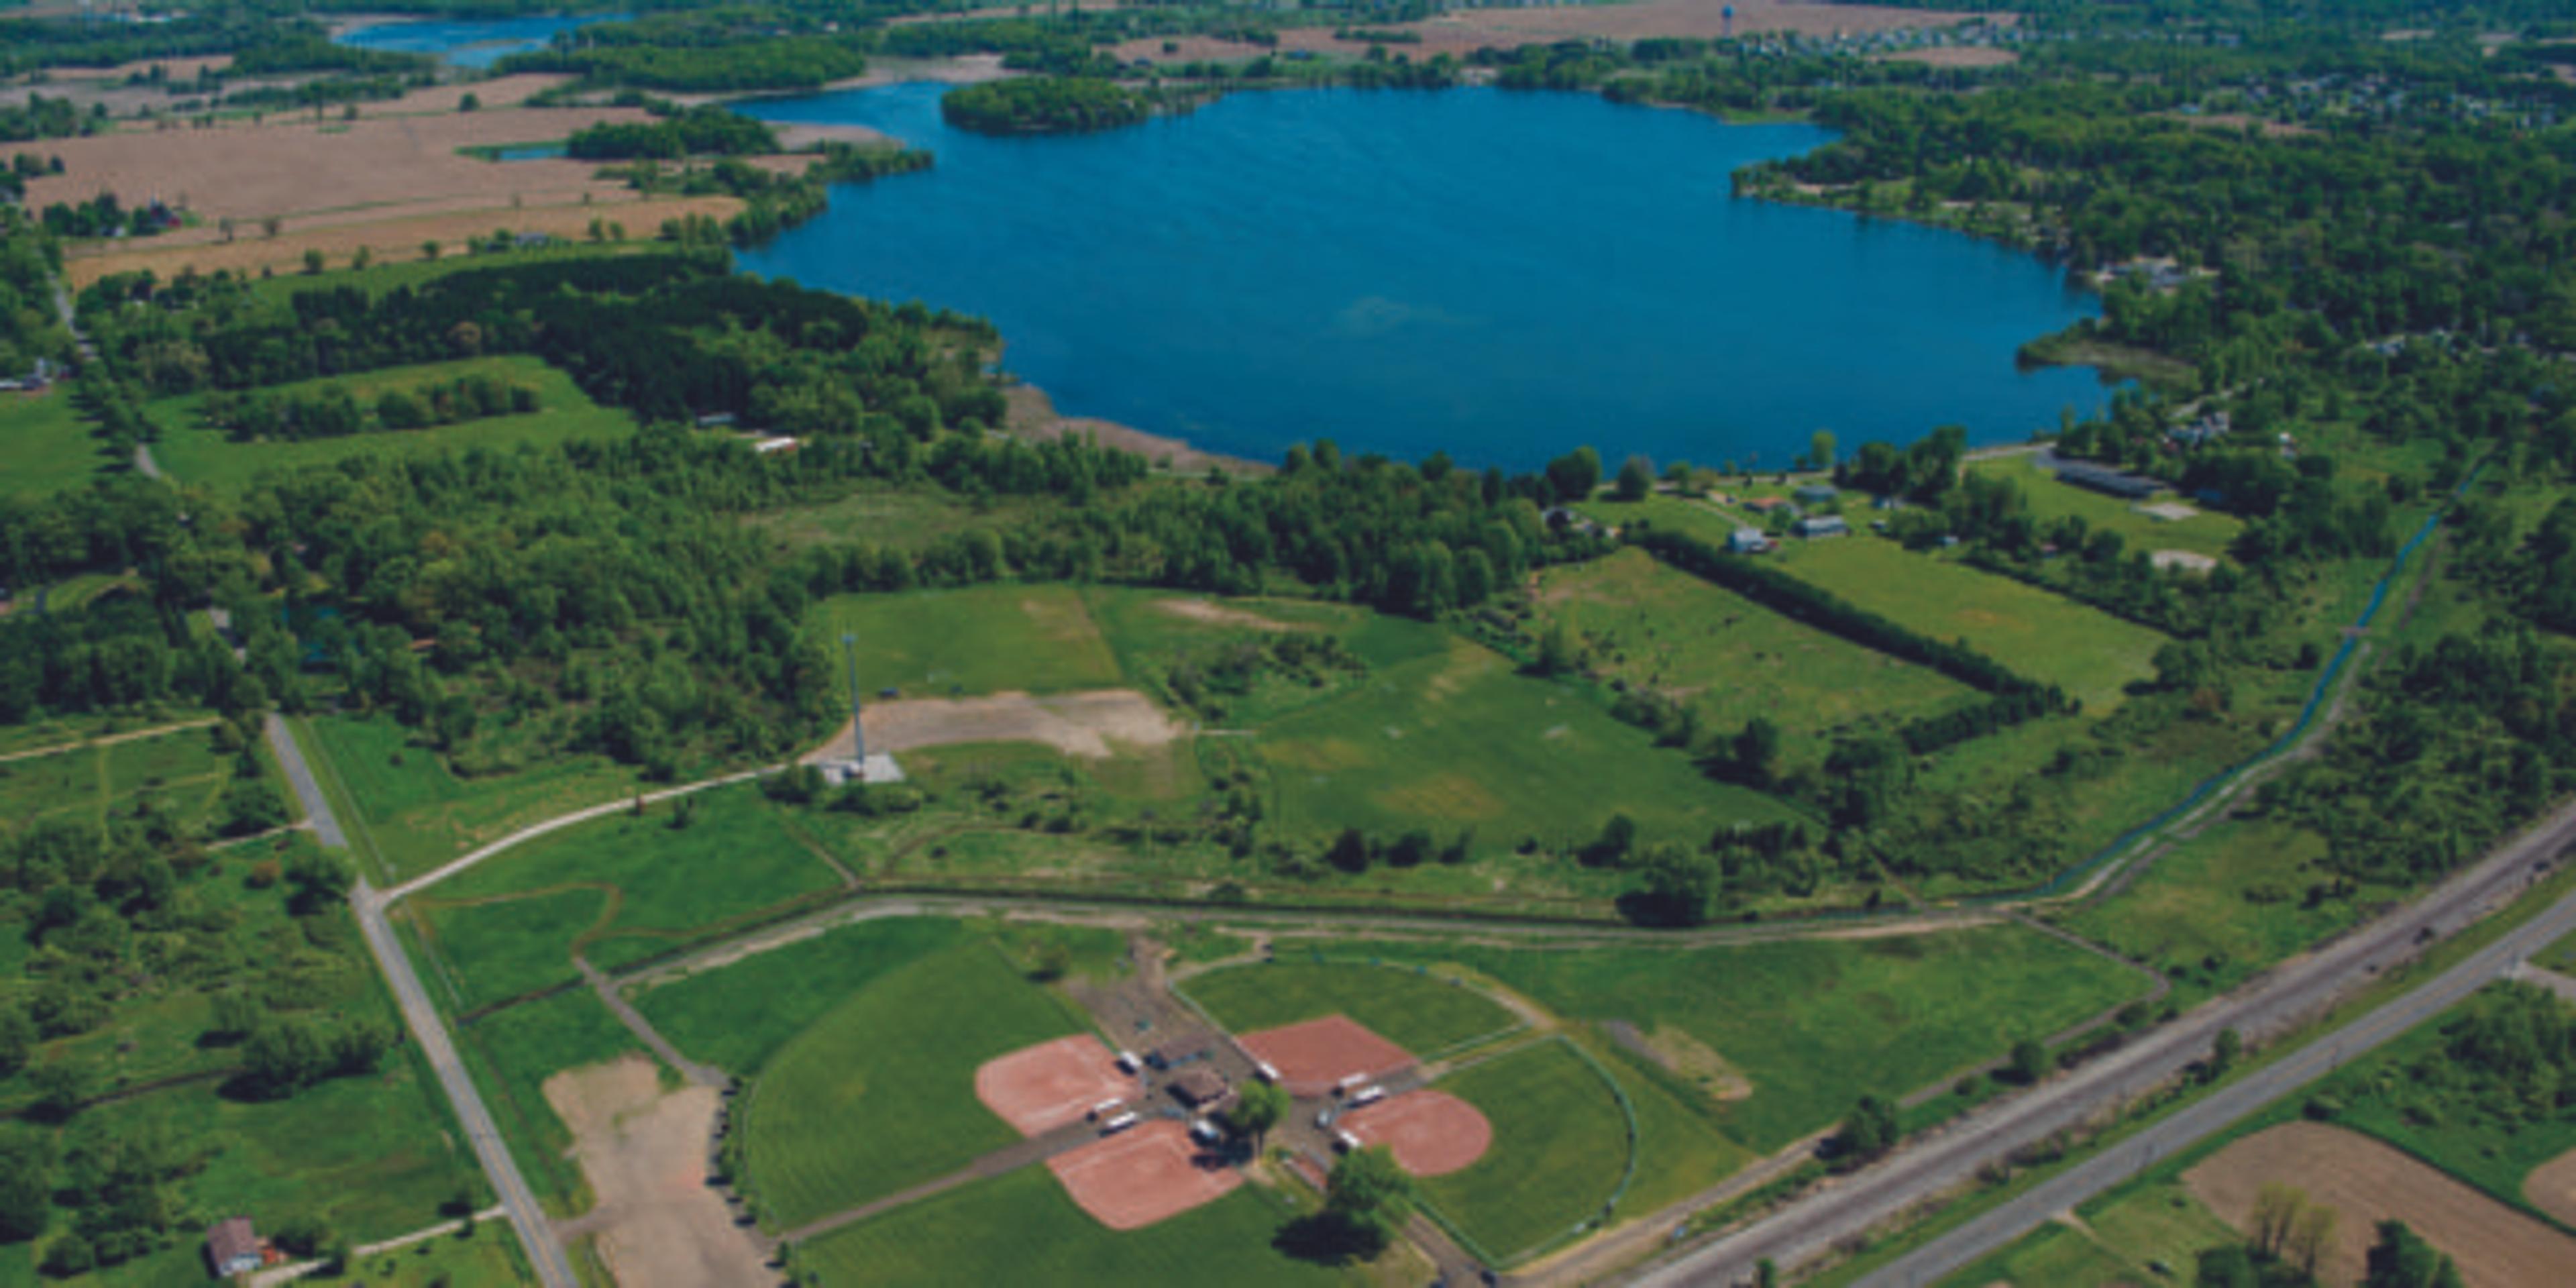 Sky view of Grass Lake parks.